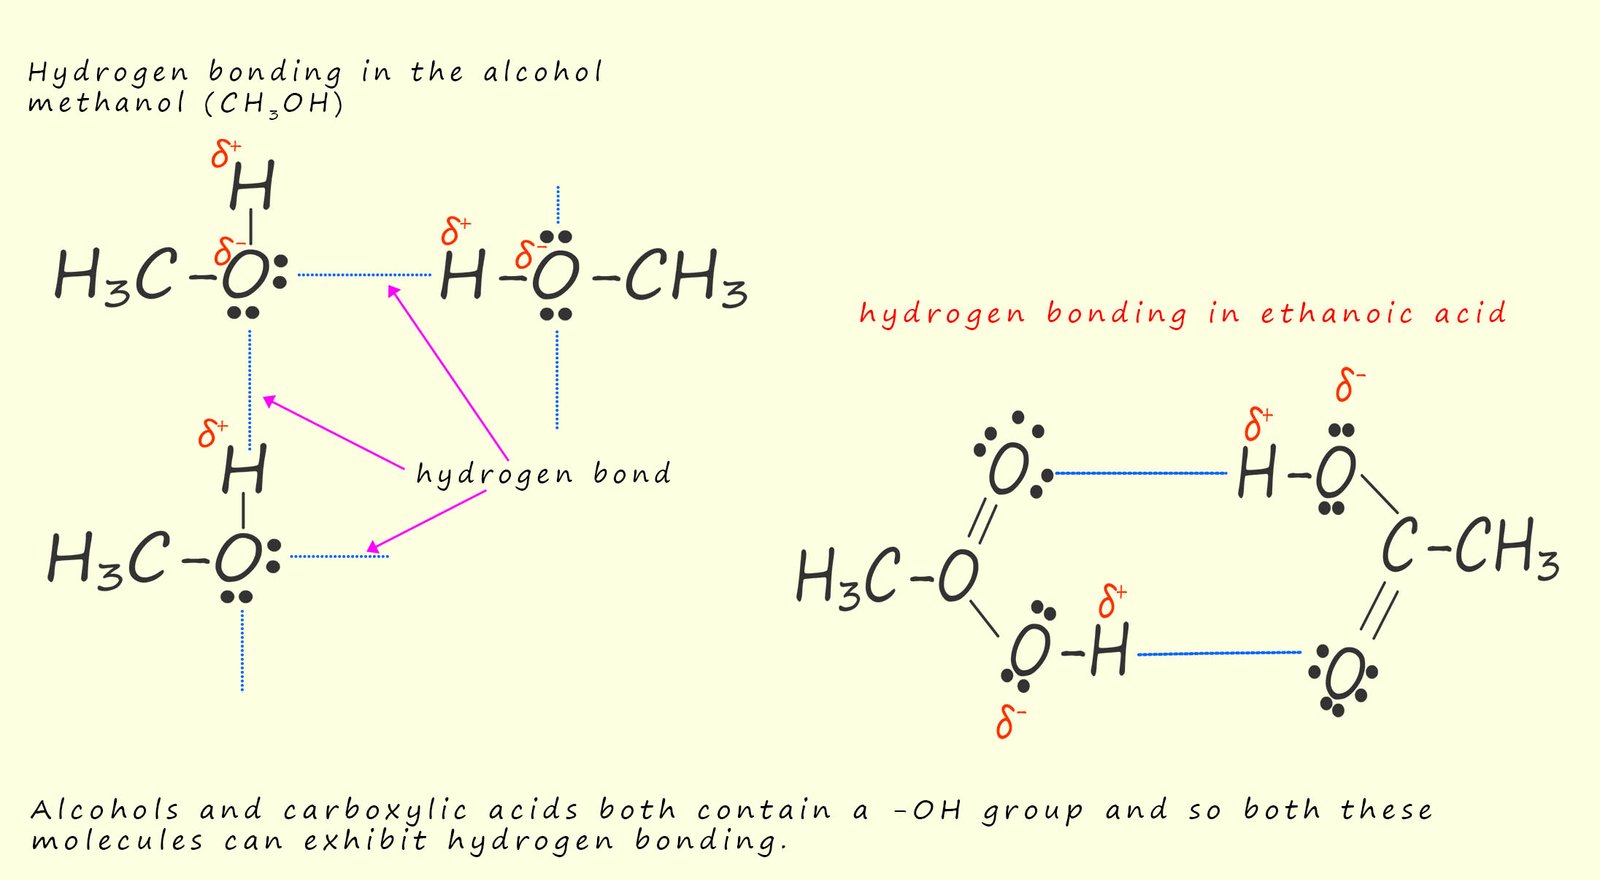 hydrogen bonding in carboxylic acids 
and alcohols